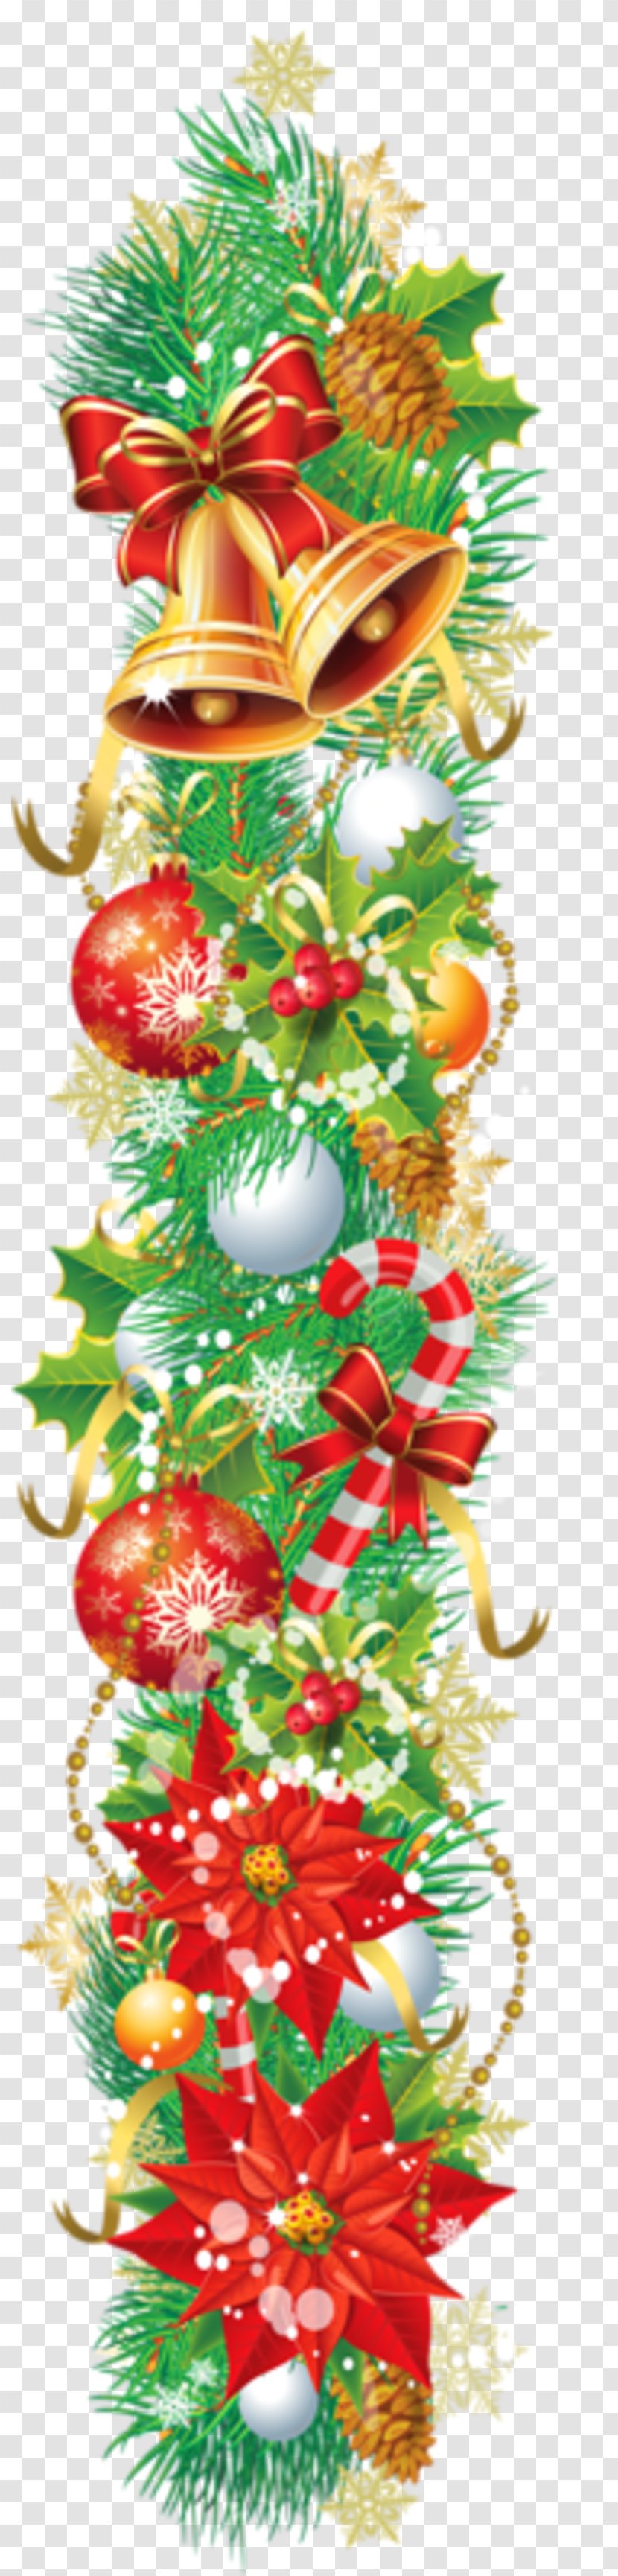 Christmas Tree Ornament - Idea - Holiday Supplies Transparent PNG